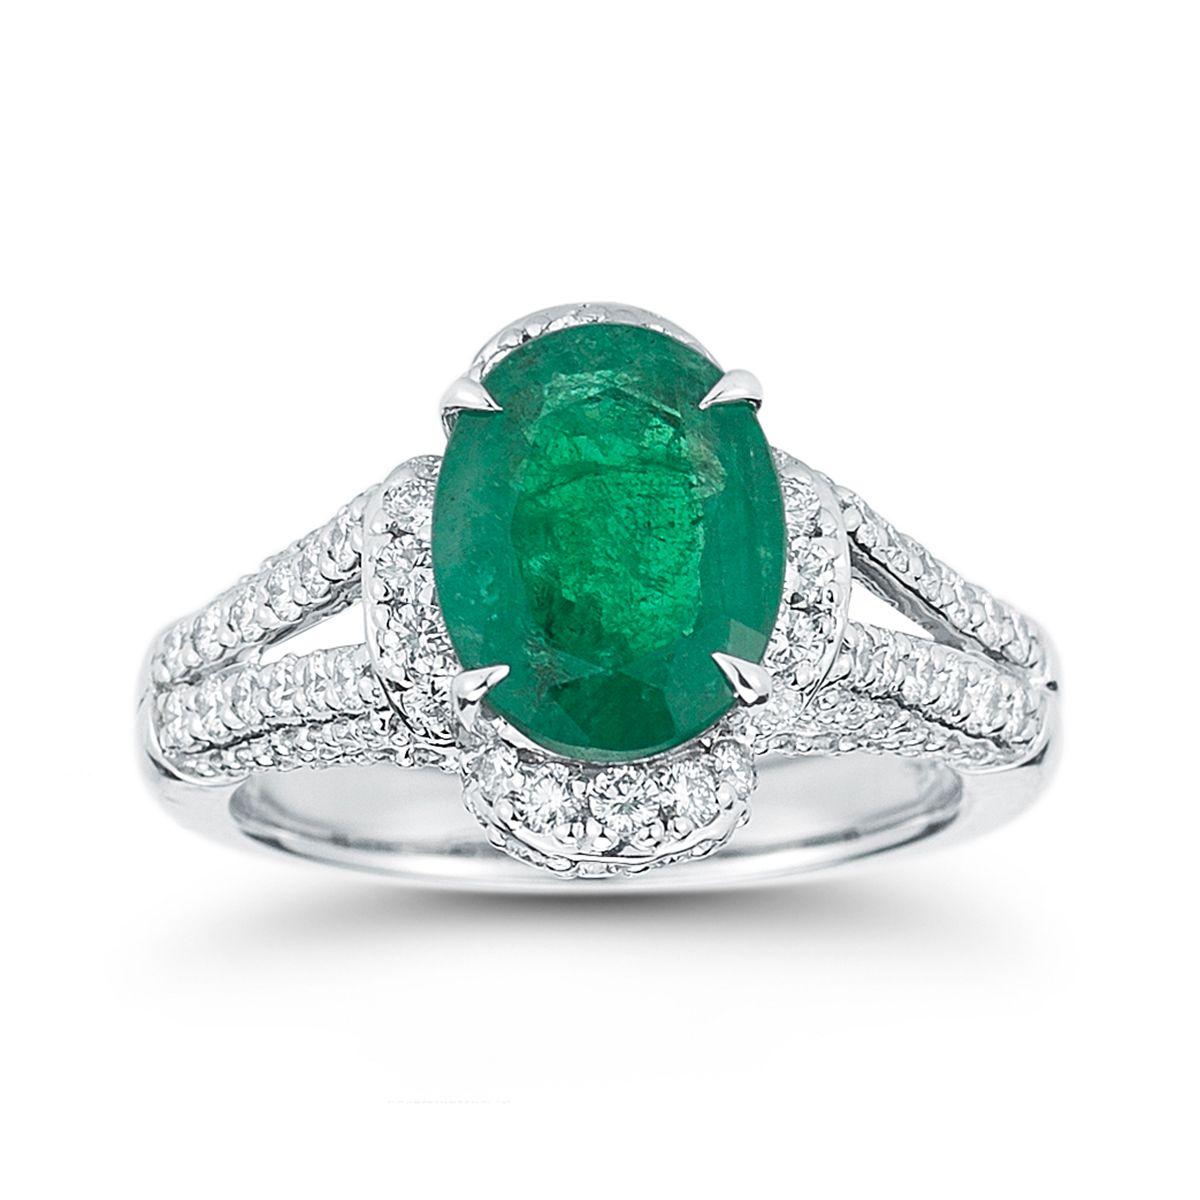 18k White Gold 2.53ct Emerald and 1.27ct Diamond Ring

EMERALD AND DIAMOND RING
A sweet split shank halo for this vivid green oval Emerald
Item: # 01867
Metal: 18k W
Color Weight: 2.53 ct.
Diamond Weight: 1.27 ct.